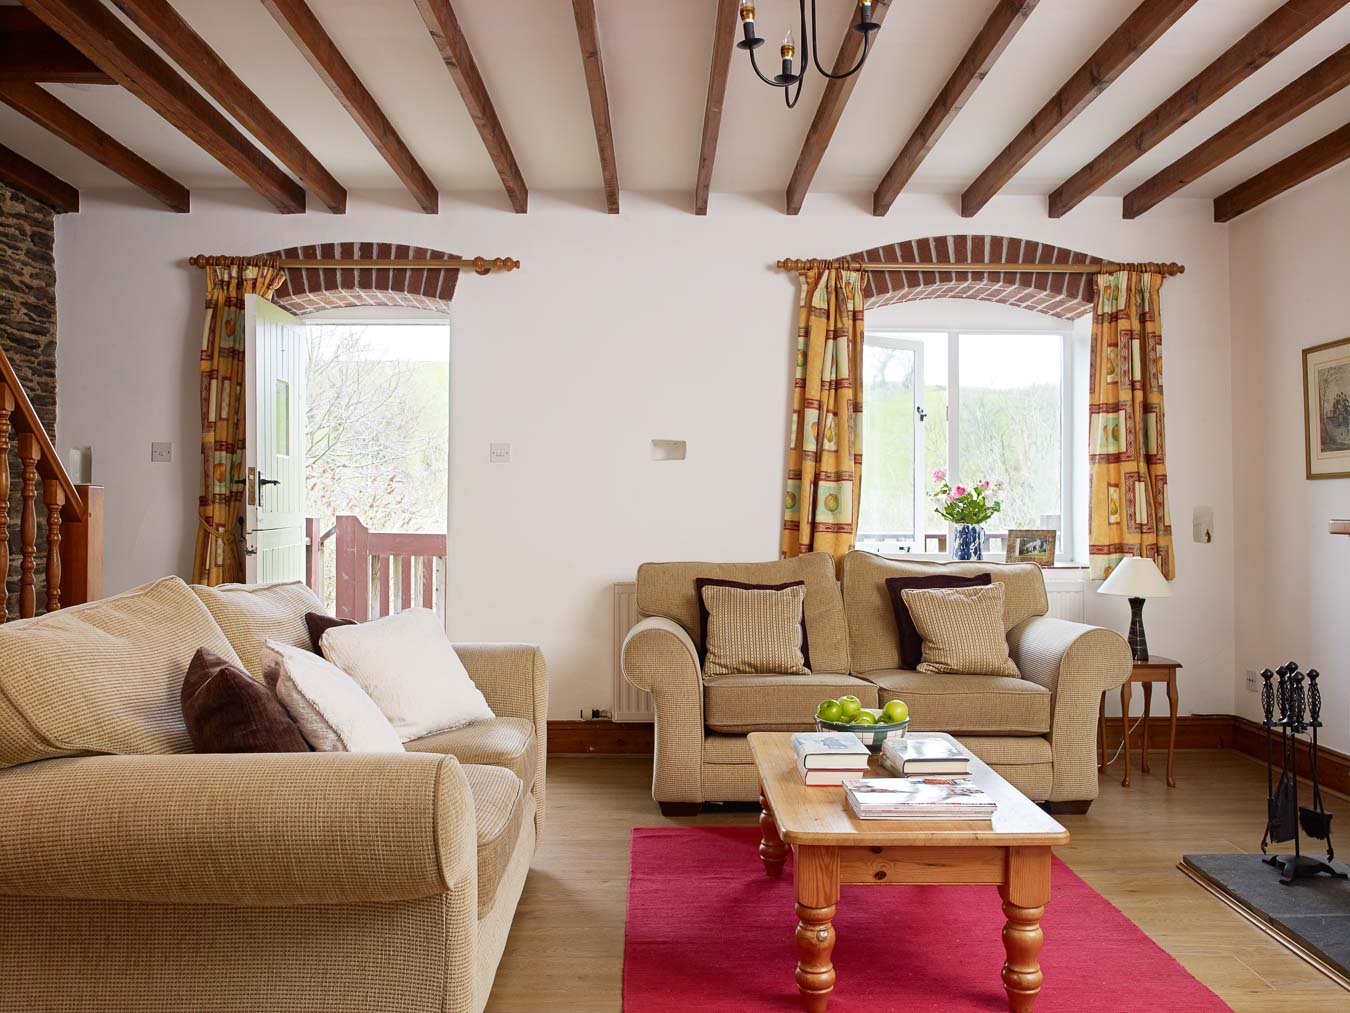 The living room at Cartwheel cottage with open fire and access onto private decking which overlooks the lawn and the Devon hills beyond at Flear Farm.